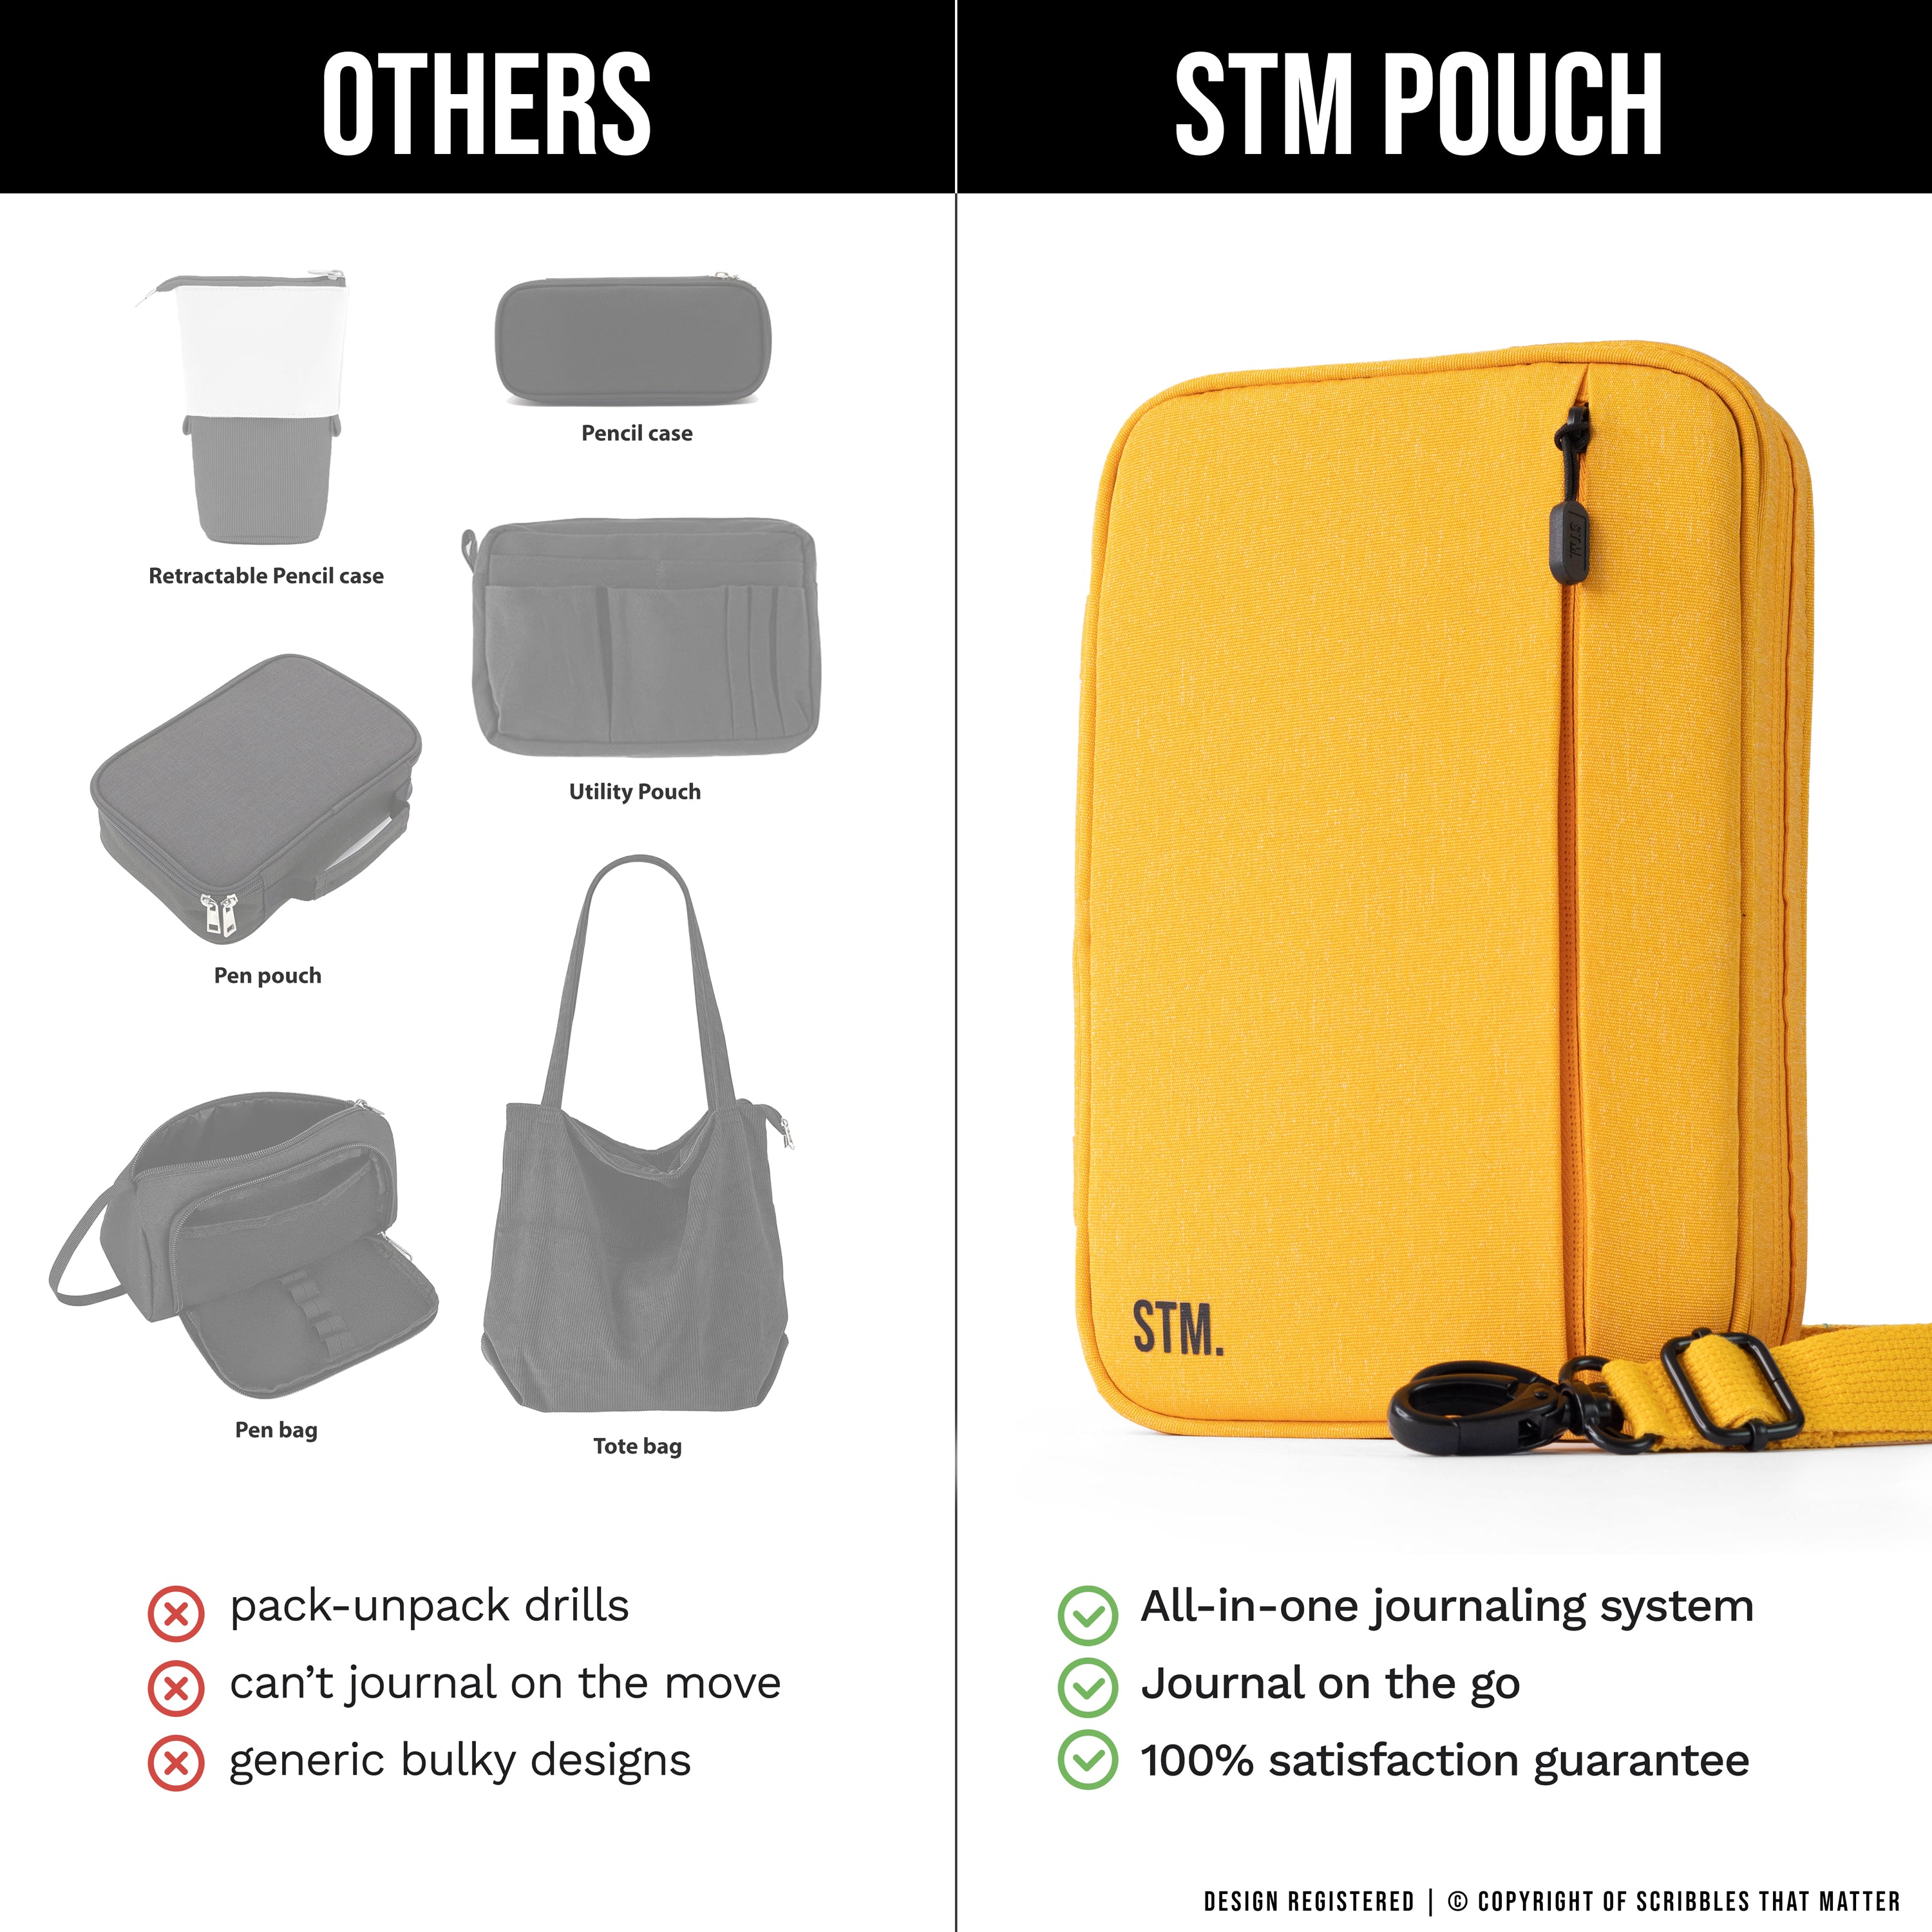 STM Pouch